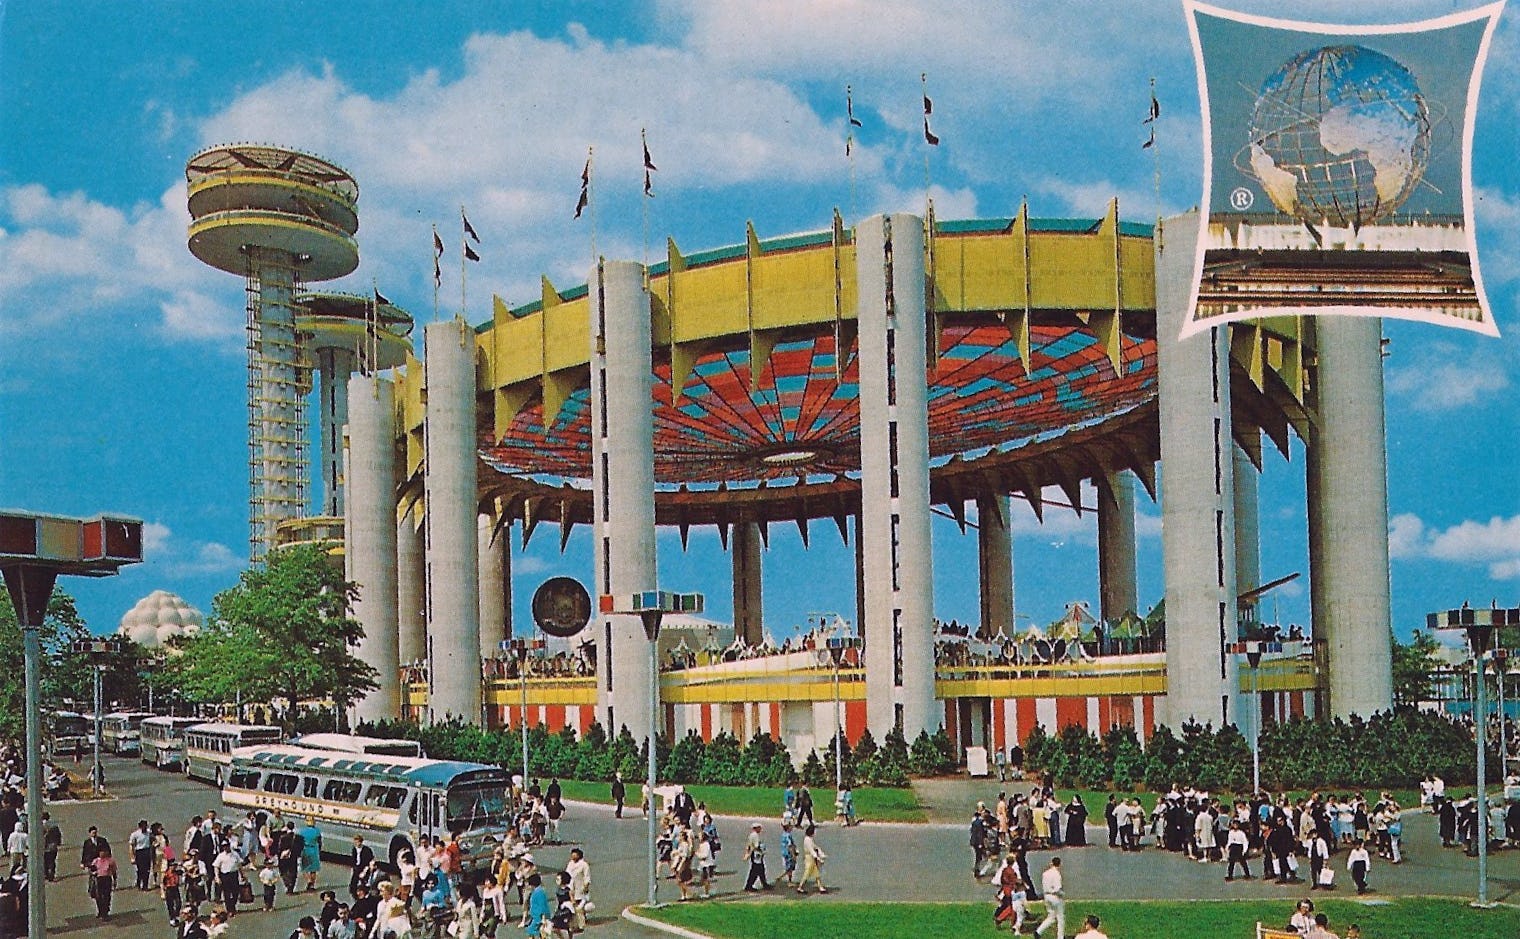 then-and-now-photos-of-the-new-york-world-s-fair-half-a-century-later